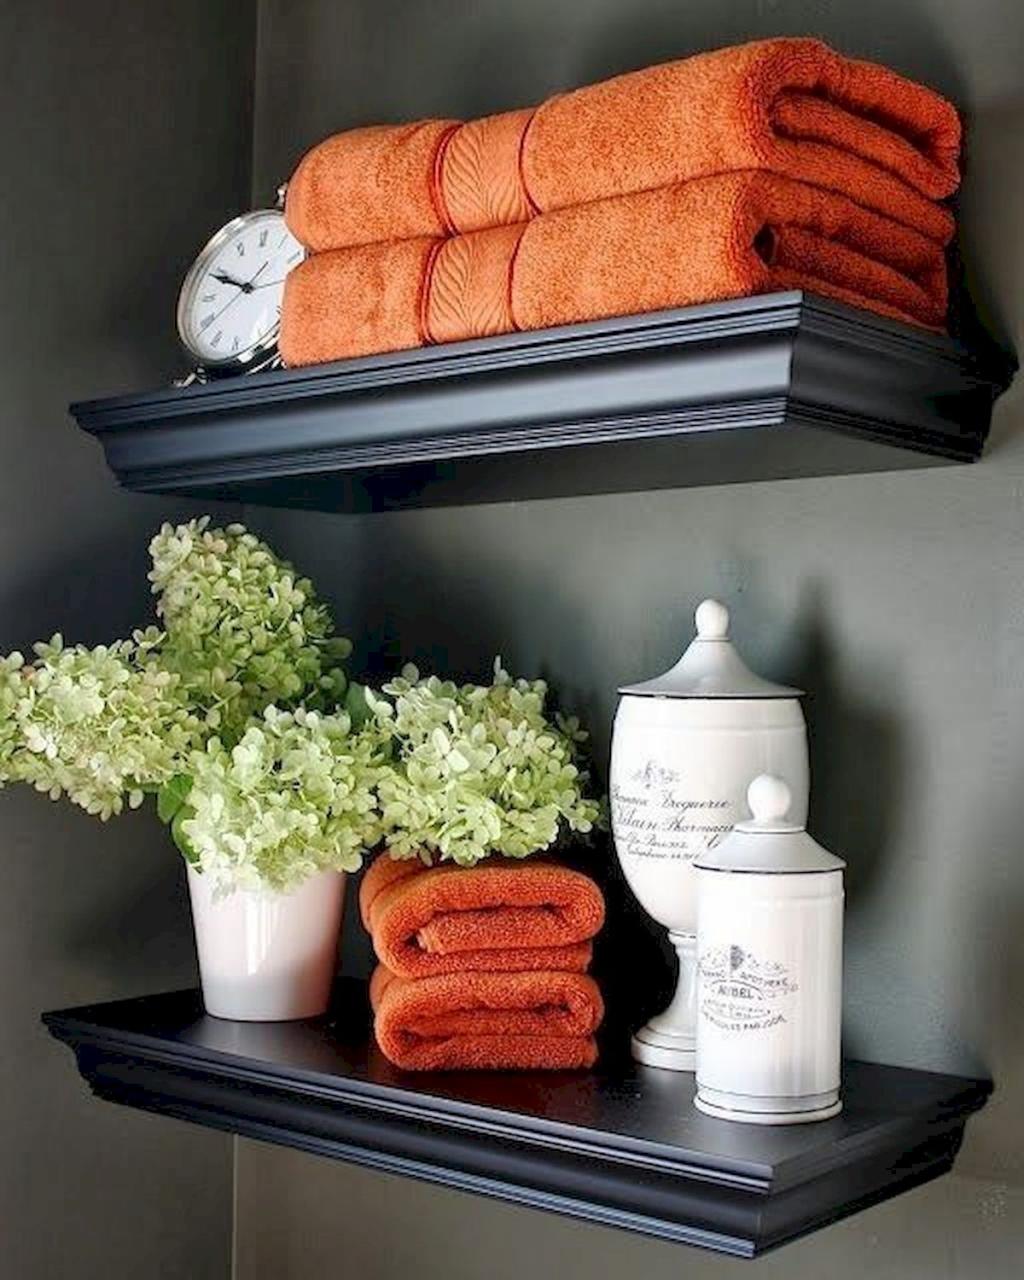 Cool 30 Awesome Fall Bathroom Decorating Ideas source https